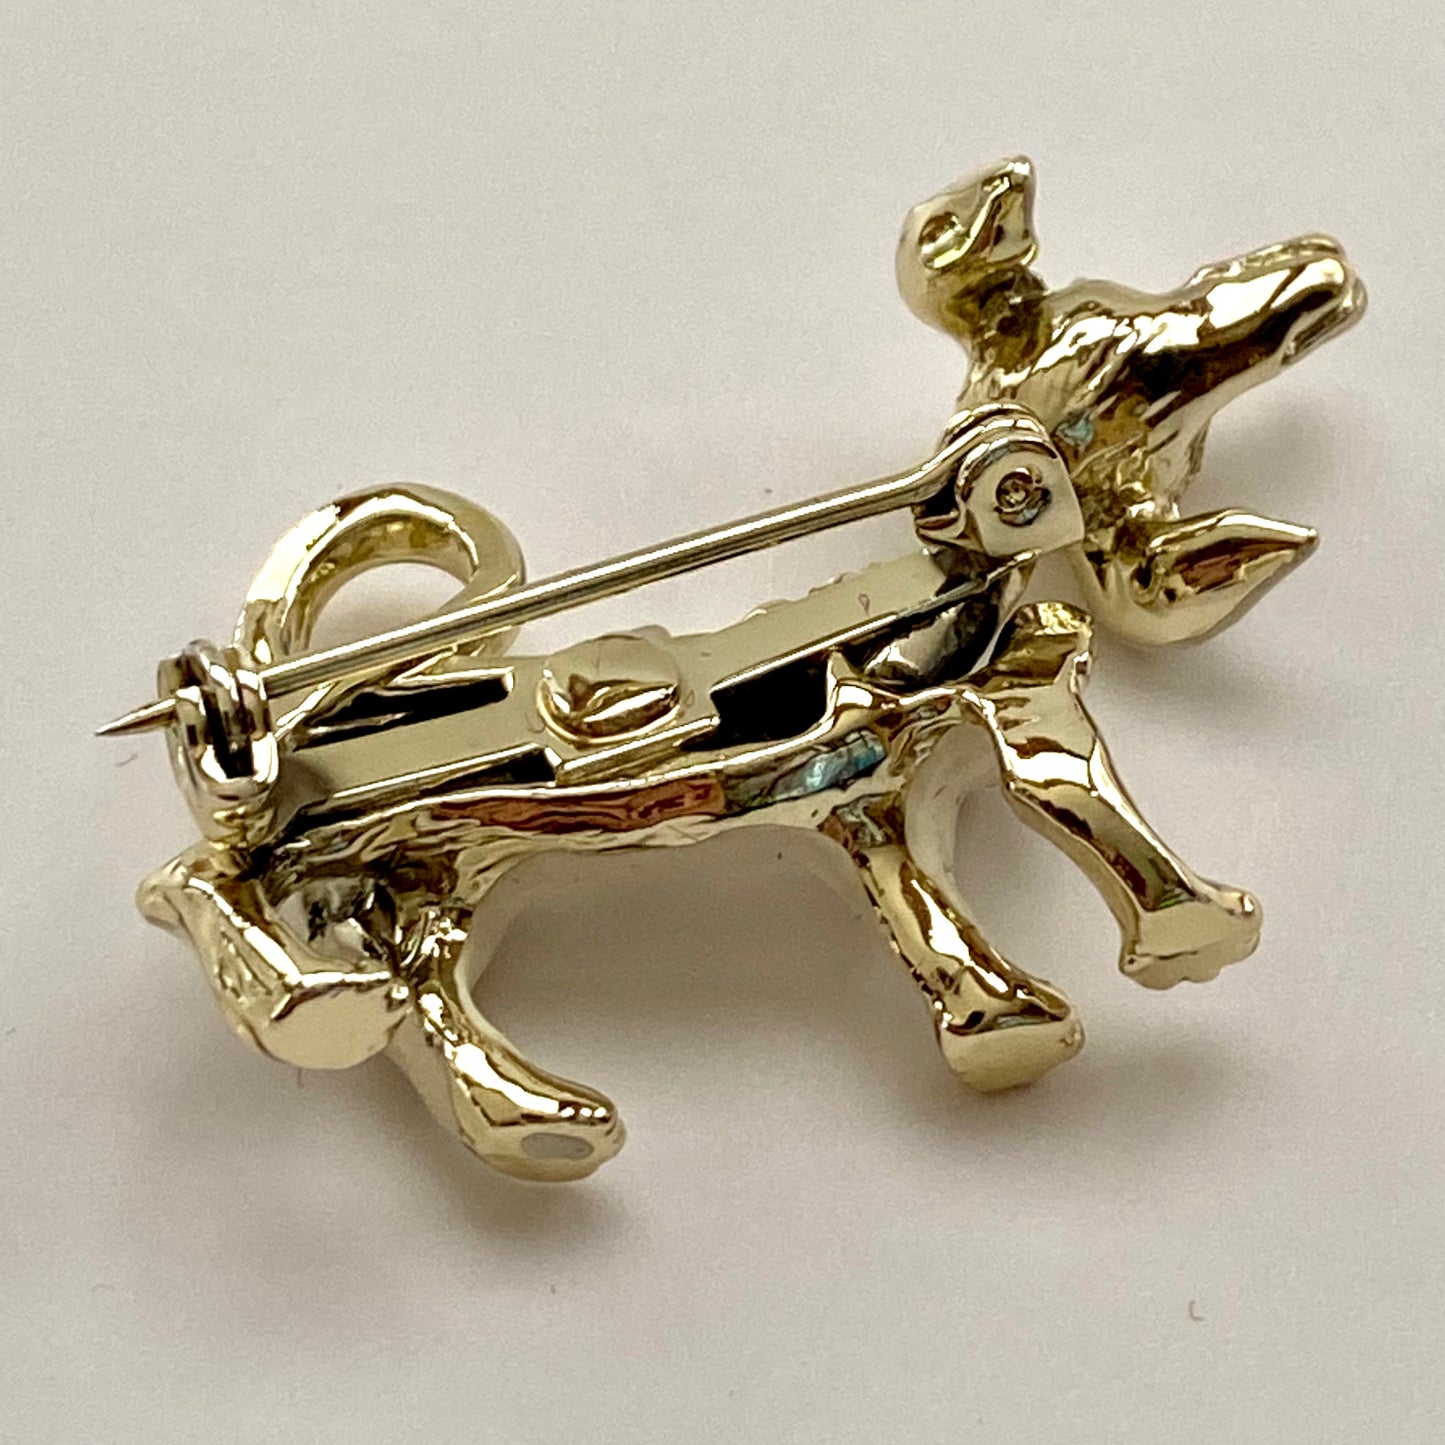 1950s Articulated Dog Pin